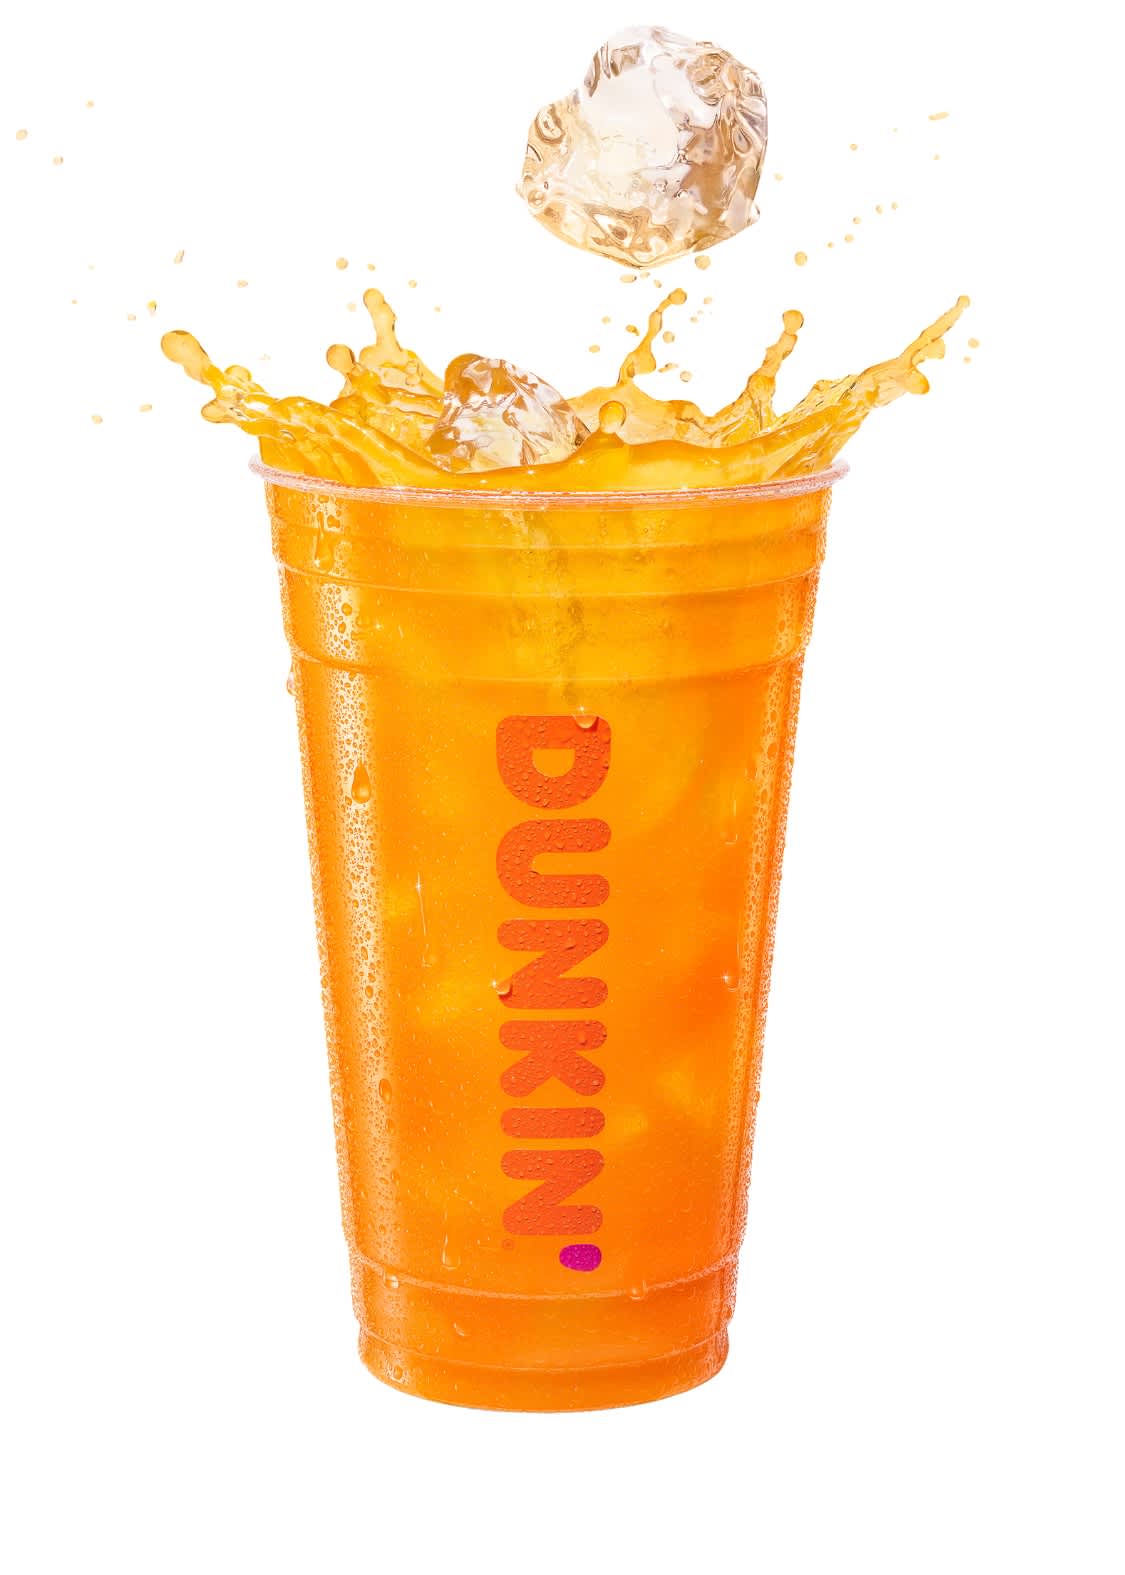 Savor the Summer With Dunkin'®: Introducing Salted Caramel Cold Brew and  Dunkin' Wraps to Fuel the Season's Adventures